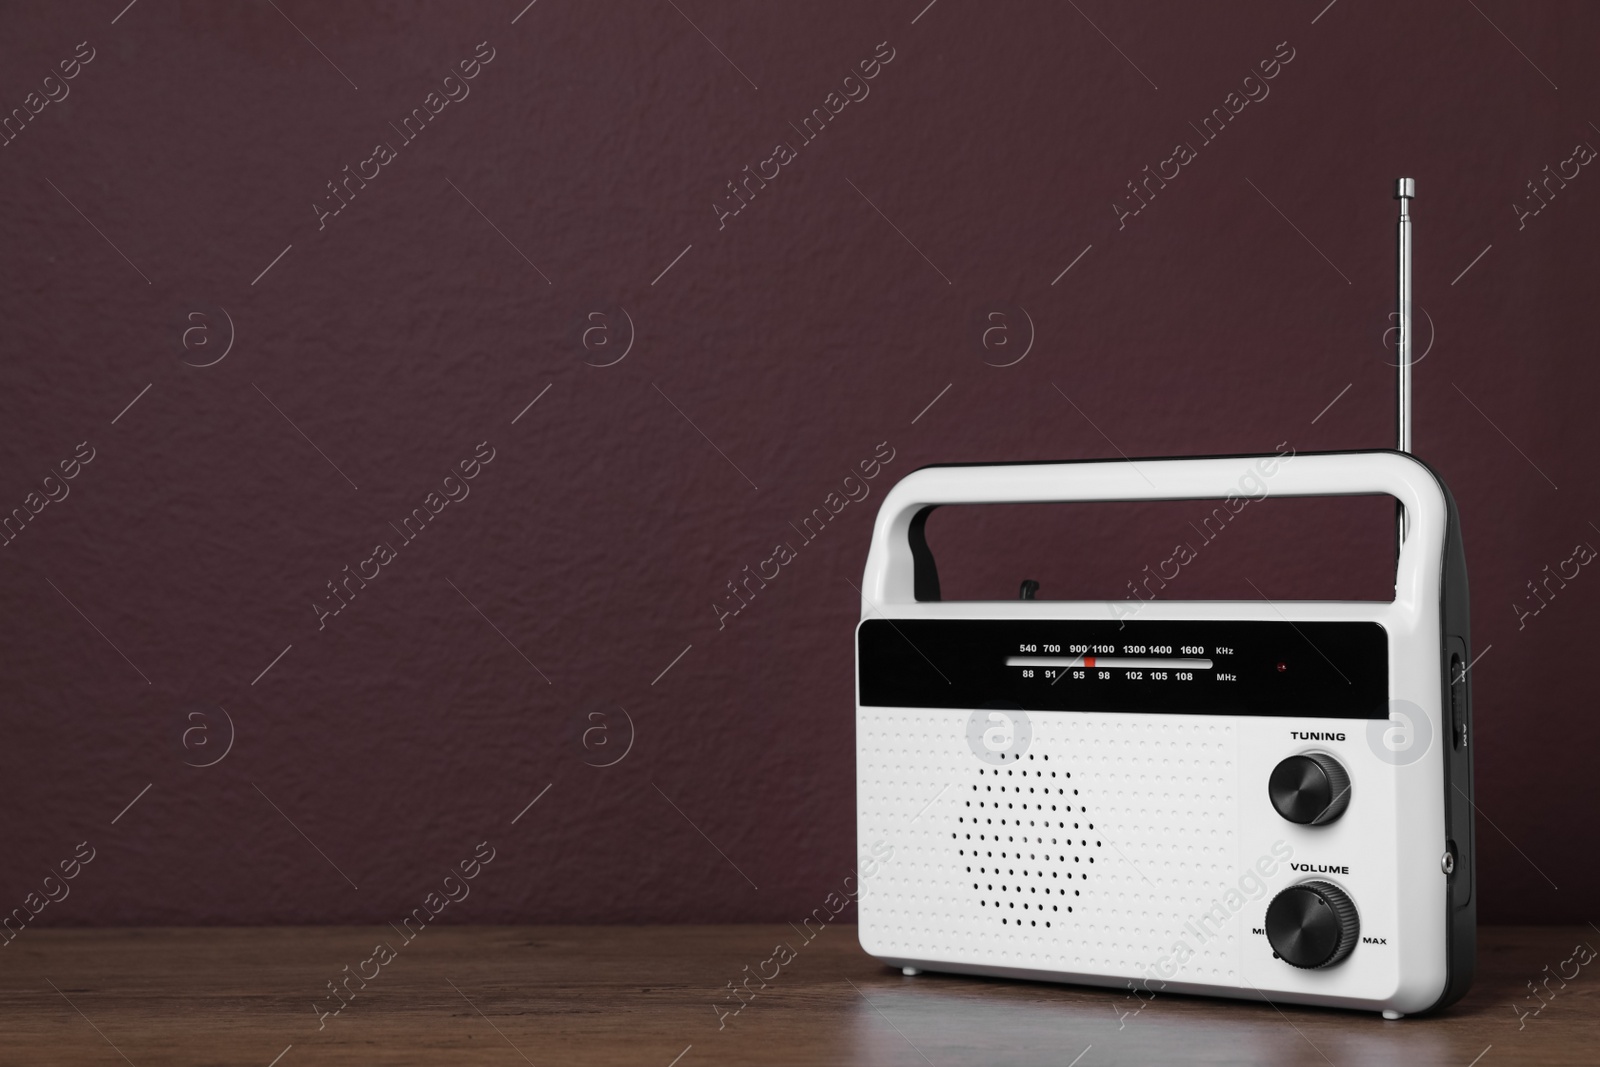 Photo of Retro radio receiver on wooden table against brown background. Space for text